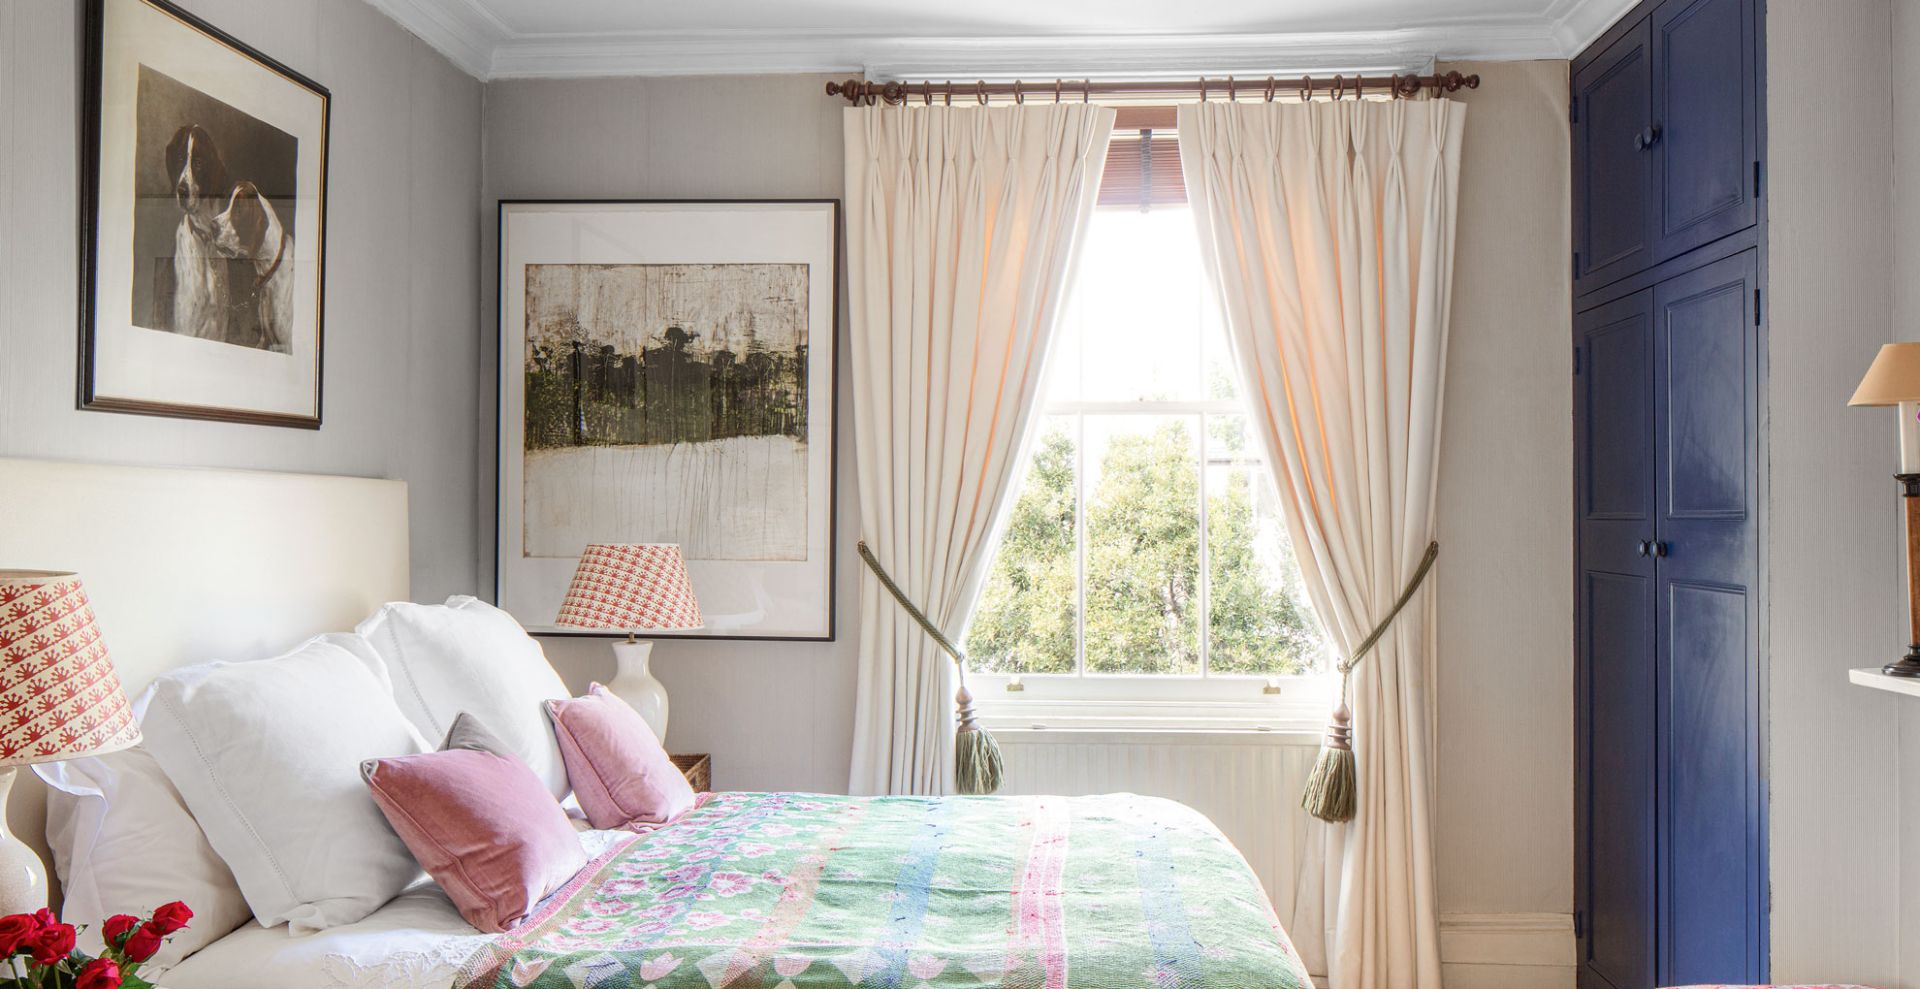 <p>                     When looking to make your bedroom feel like a luxury hotel it's important to layer window treatments to ensure your bedroom delivers a good night's sleep but also looks well-dressed.                   </p>                                      <p>                     "Dress your windows with long drapes to make them a feature," advises Georgia.                    </p>                                      <p>                     "Using blackout curtains is a quick and simple way to add an element of luxury to your bedroom, as well as being incredibly practical," adds Lucy. "Not only do they darken your room to give you a better night’s sleep, but they also provide a highly luxurious feel to your bedroom with a hotel-room finish you’ll love coming home to."                   </p>